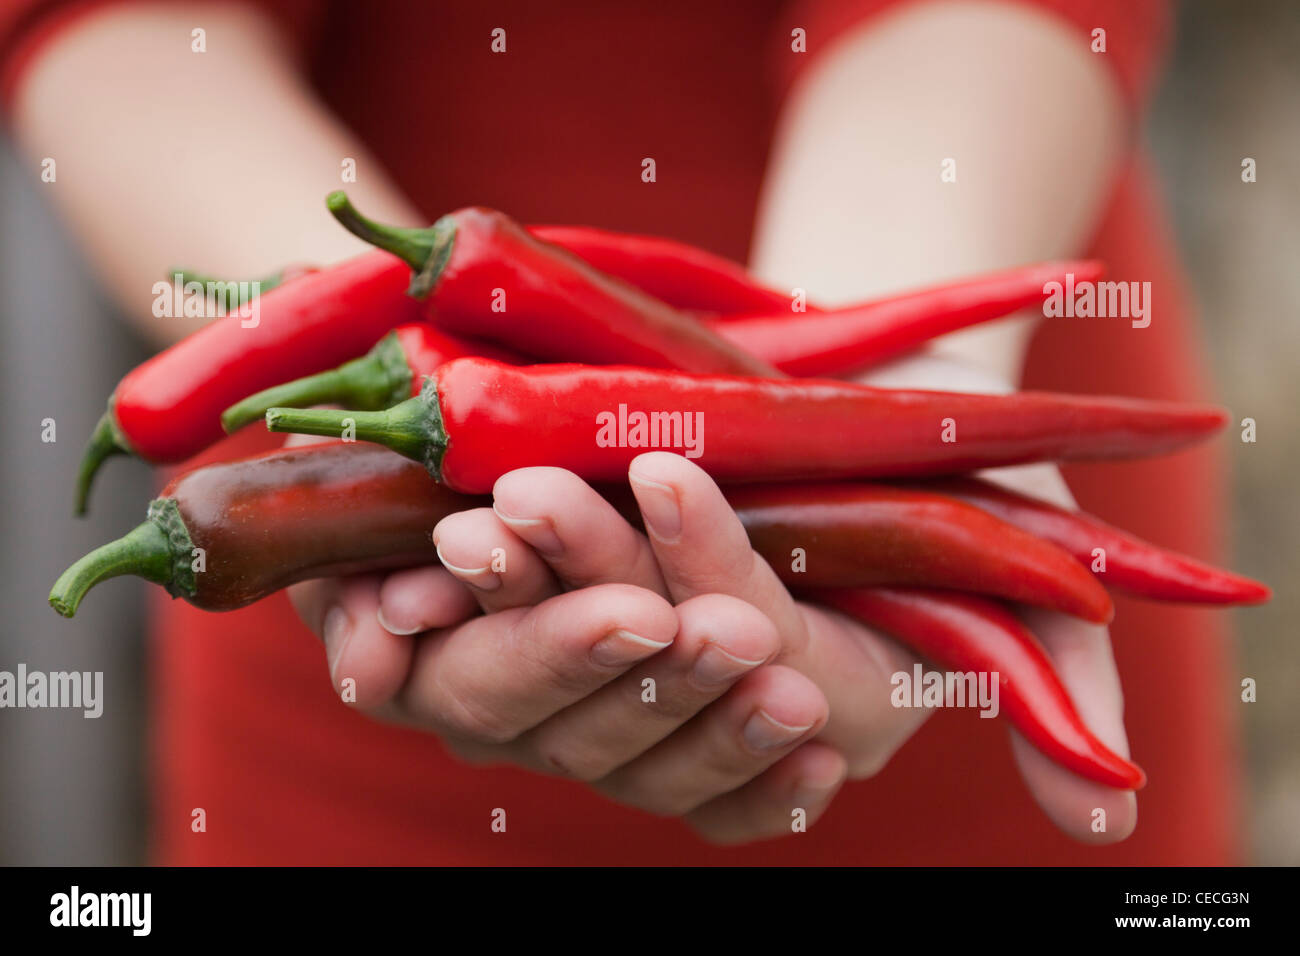 Person holding red hot chilli peppers Stock Photo